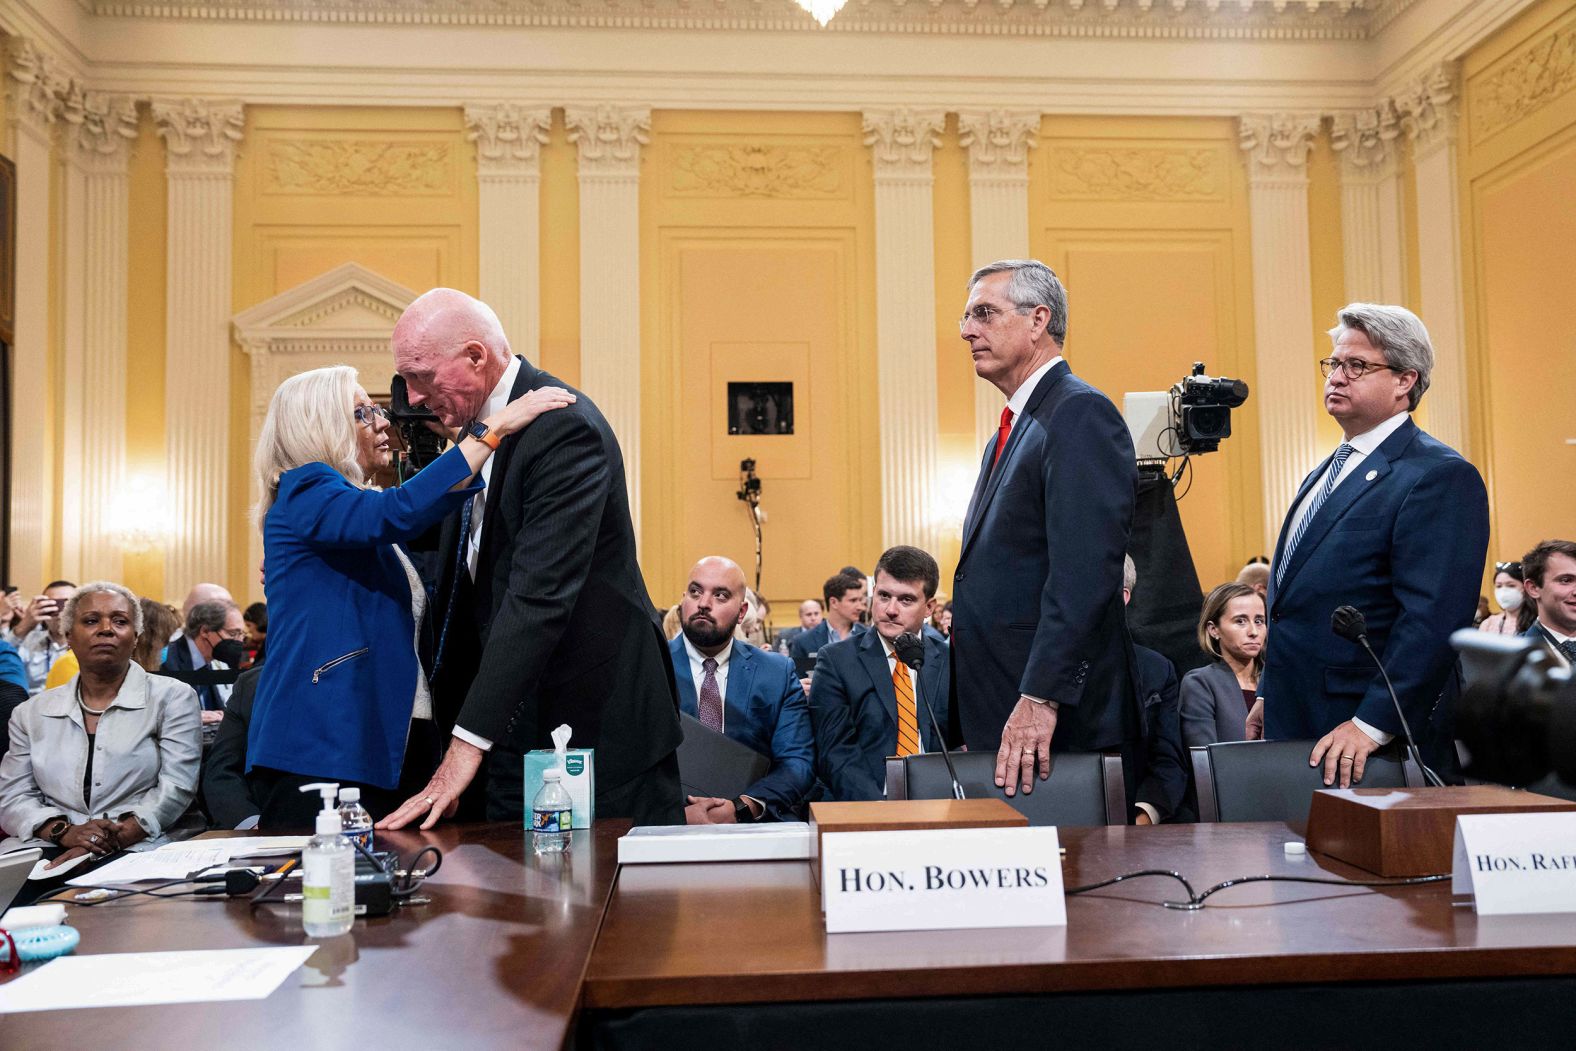 Bowers is hugged by Cheney after his testimony on June 21. Bowers, a Republican, defied a scheme to overturn the election results in his state, and <a href="index.php?page=&url=https%3A%2F%2Fwww.cnn.com%2Fpolitics%2Flive-news%2Fjanuary-6-hearings-june-21%2Fh_29dae2b5e7e4b560fa75d919562ec68e" target="_blank">he gave emotional testimony about the impact that had.</a> He described "disturbing" protests outside his home, and he read a passage from his personal journal about friends who had turned on him. 